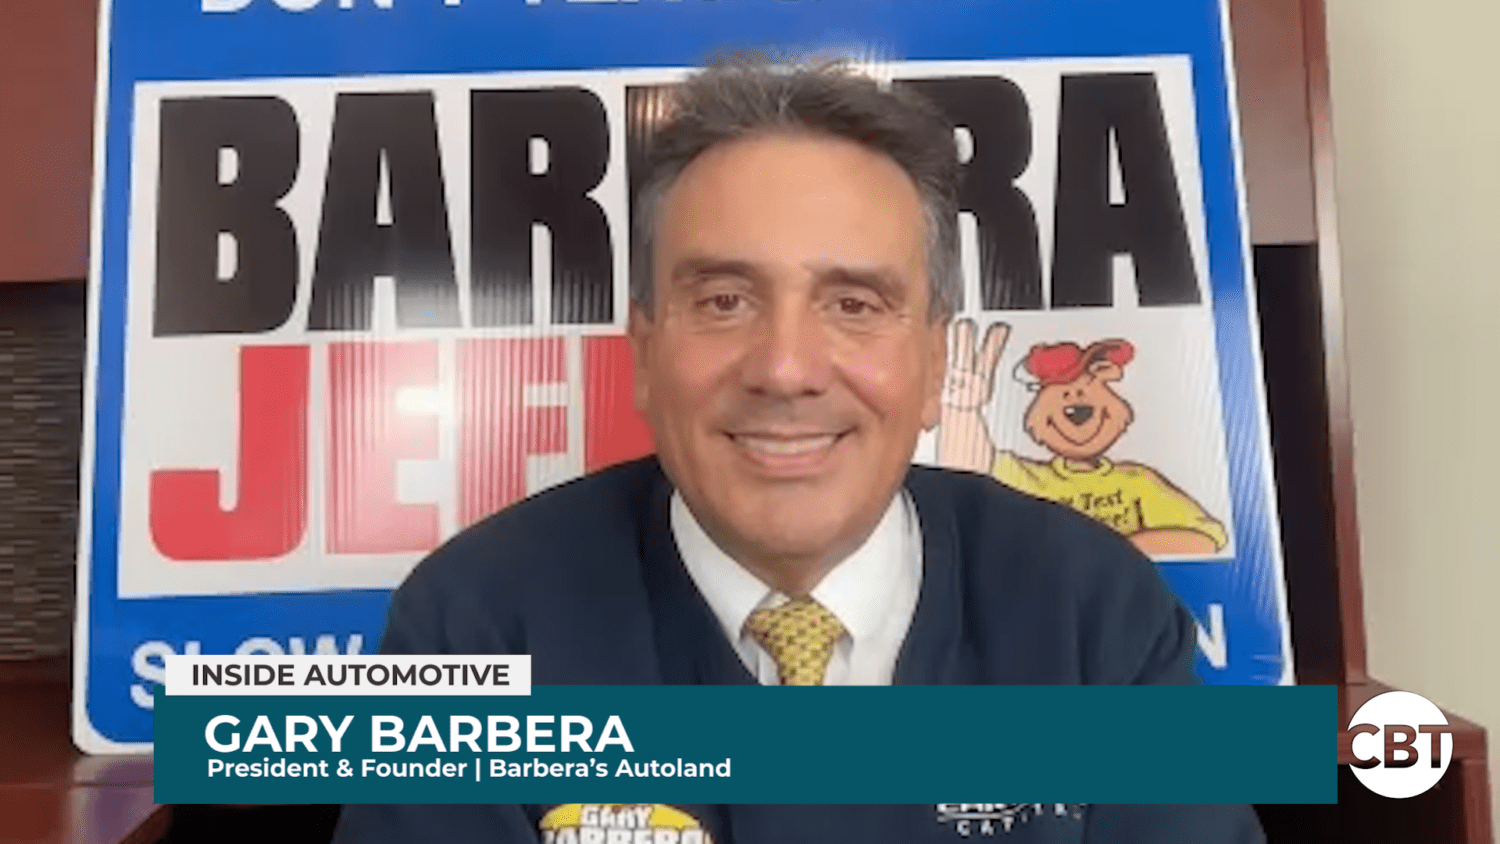 Gary Barbera joins Inside Automotive to give a boots-on-the-ground view of the car market and how dealerships are navigating headwinds.